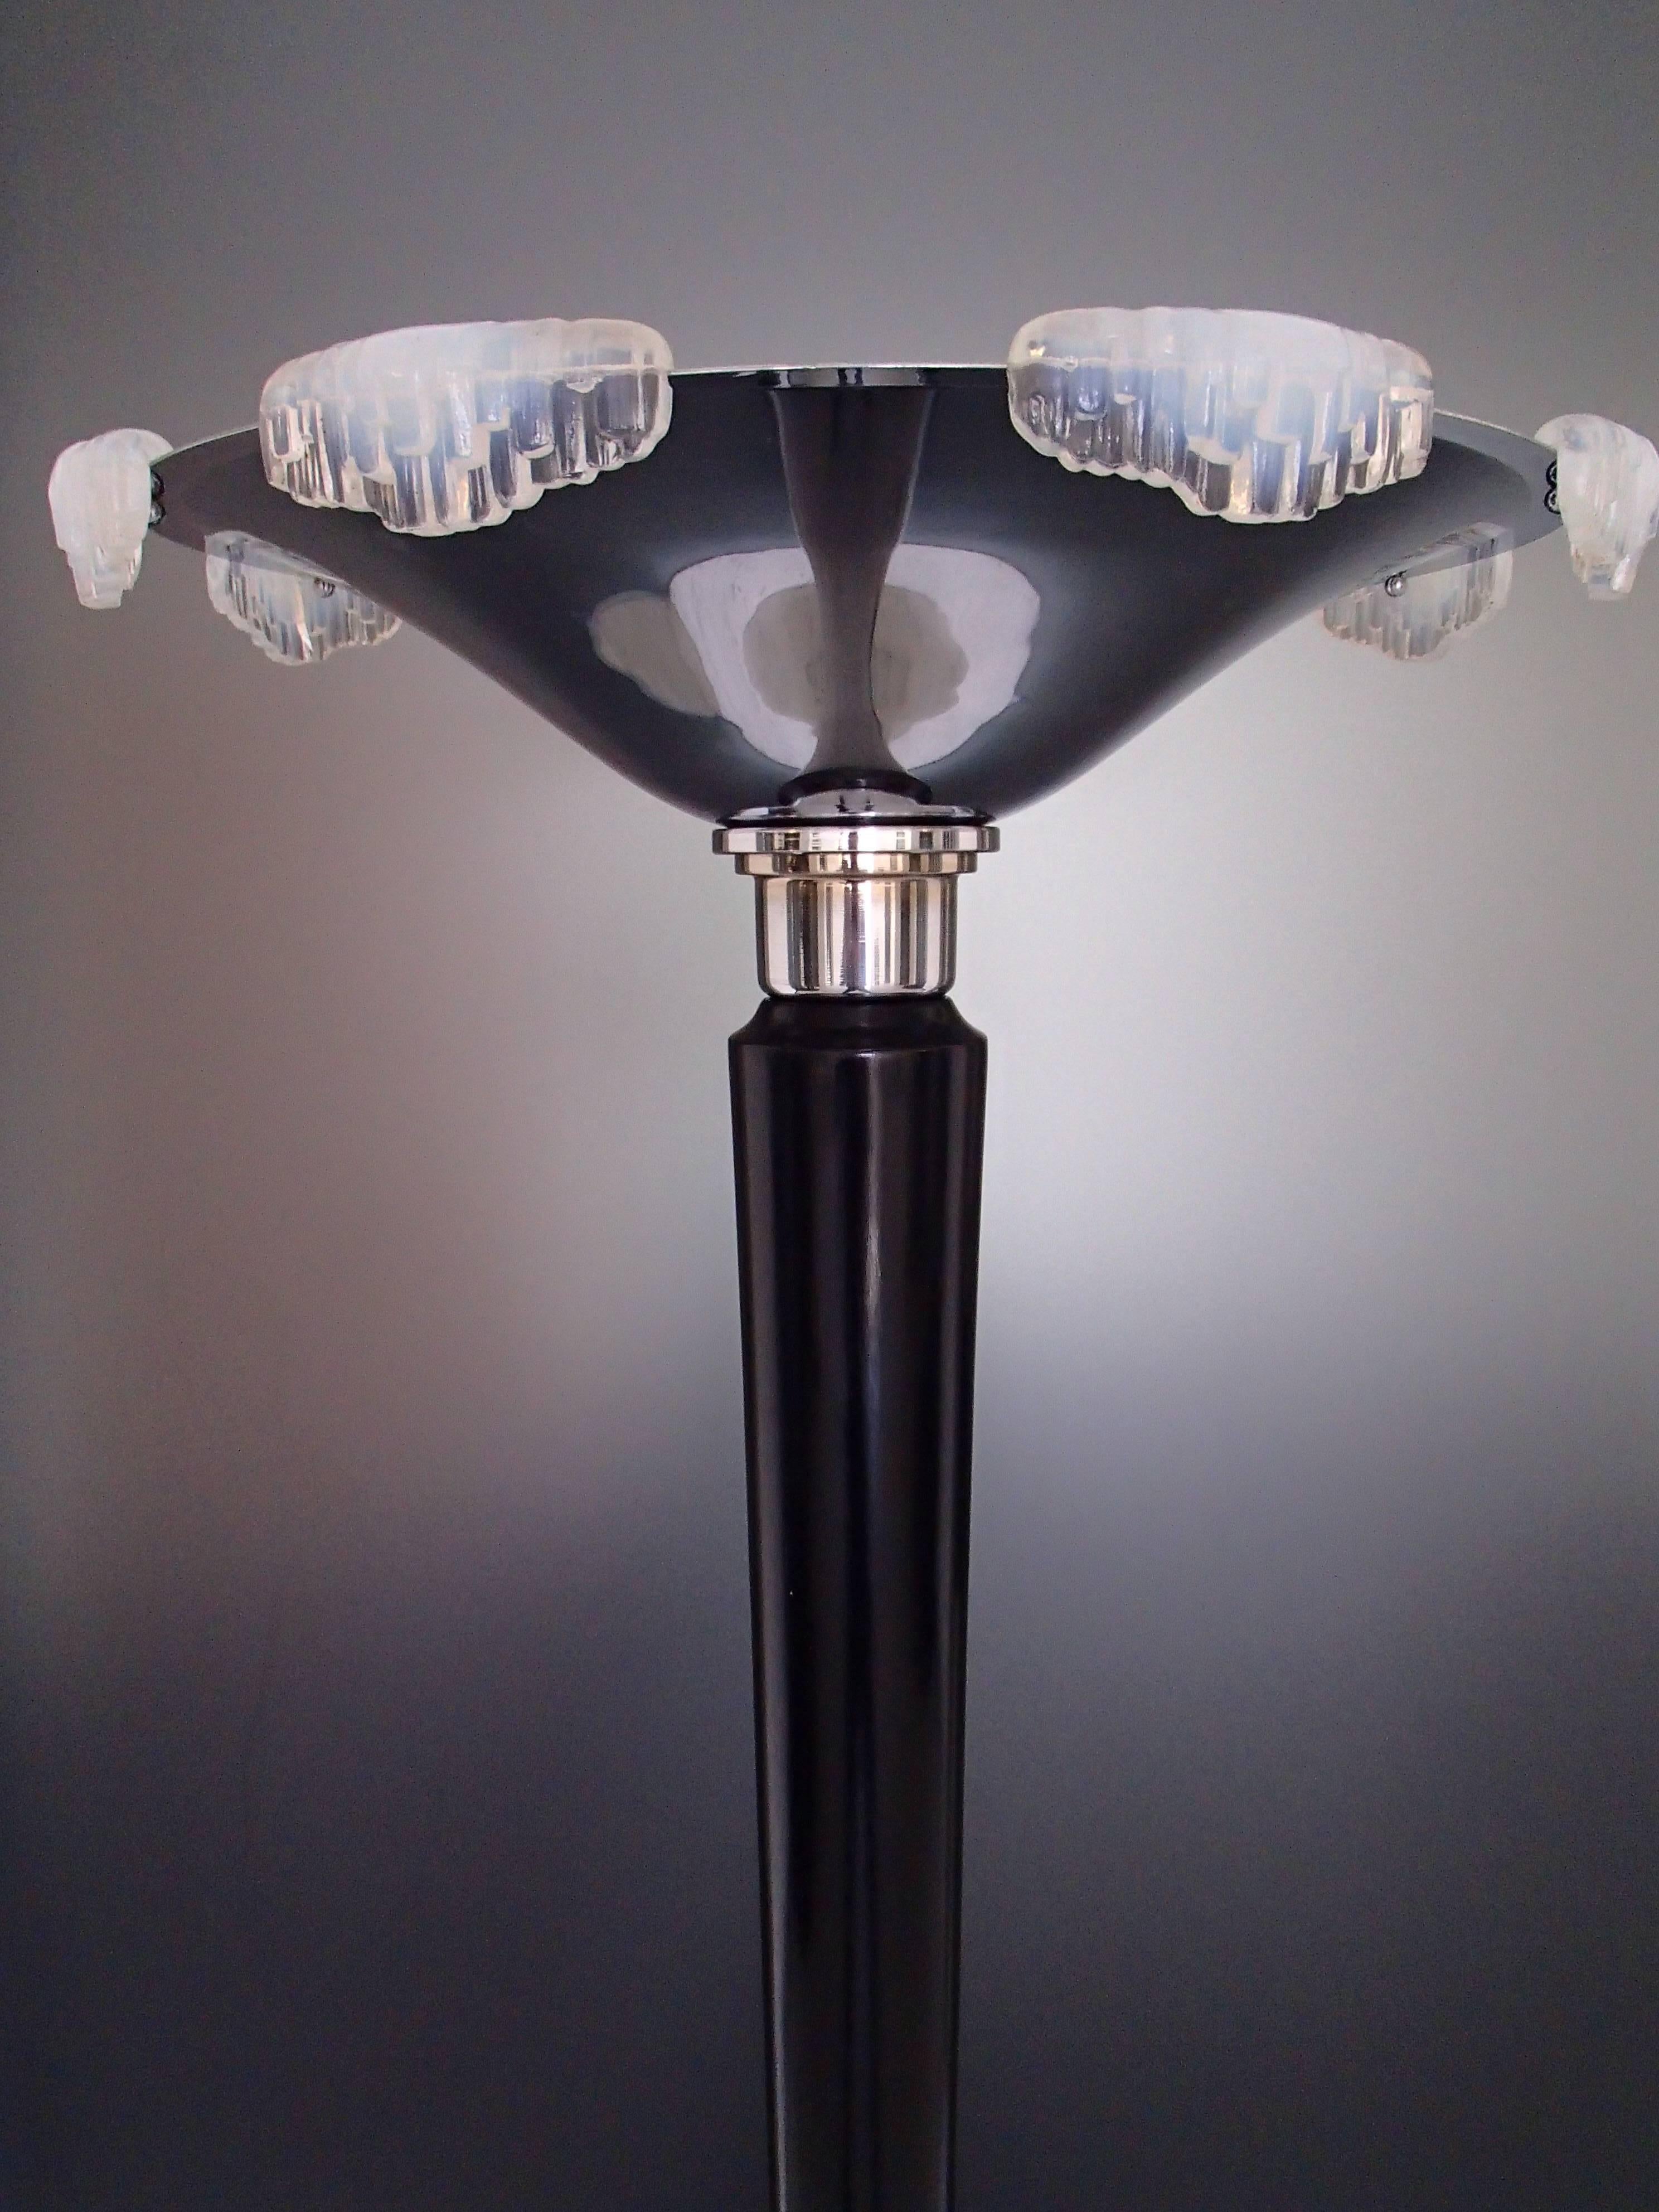 Art Deco floor lamp or torch chrome with sabino glass parts. On the glass parts are some chips.